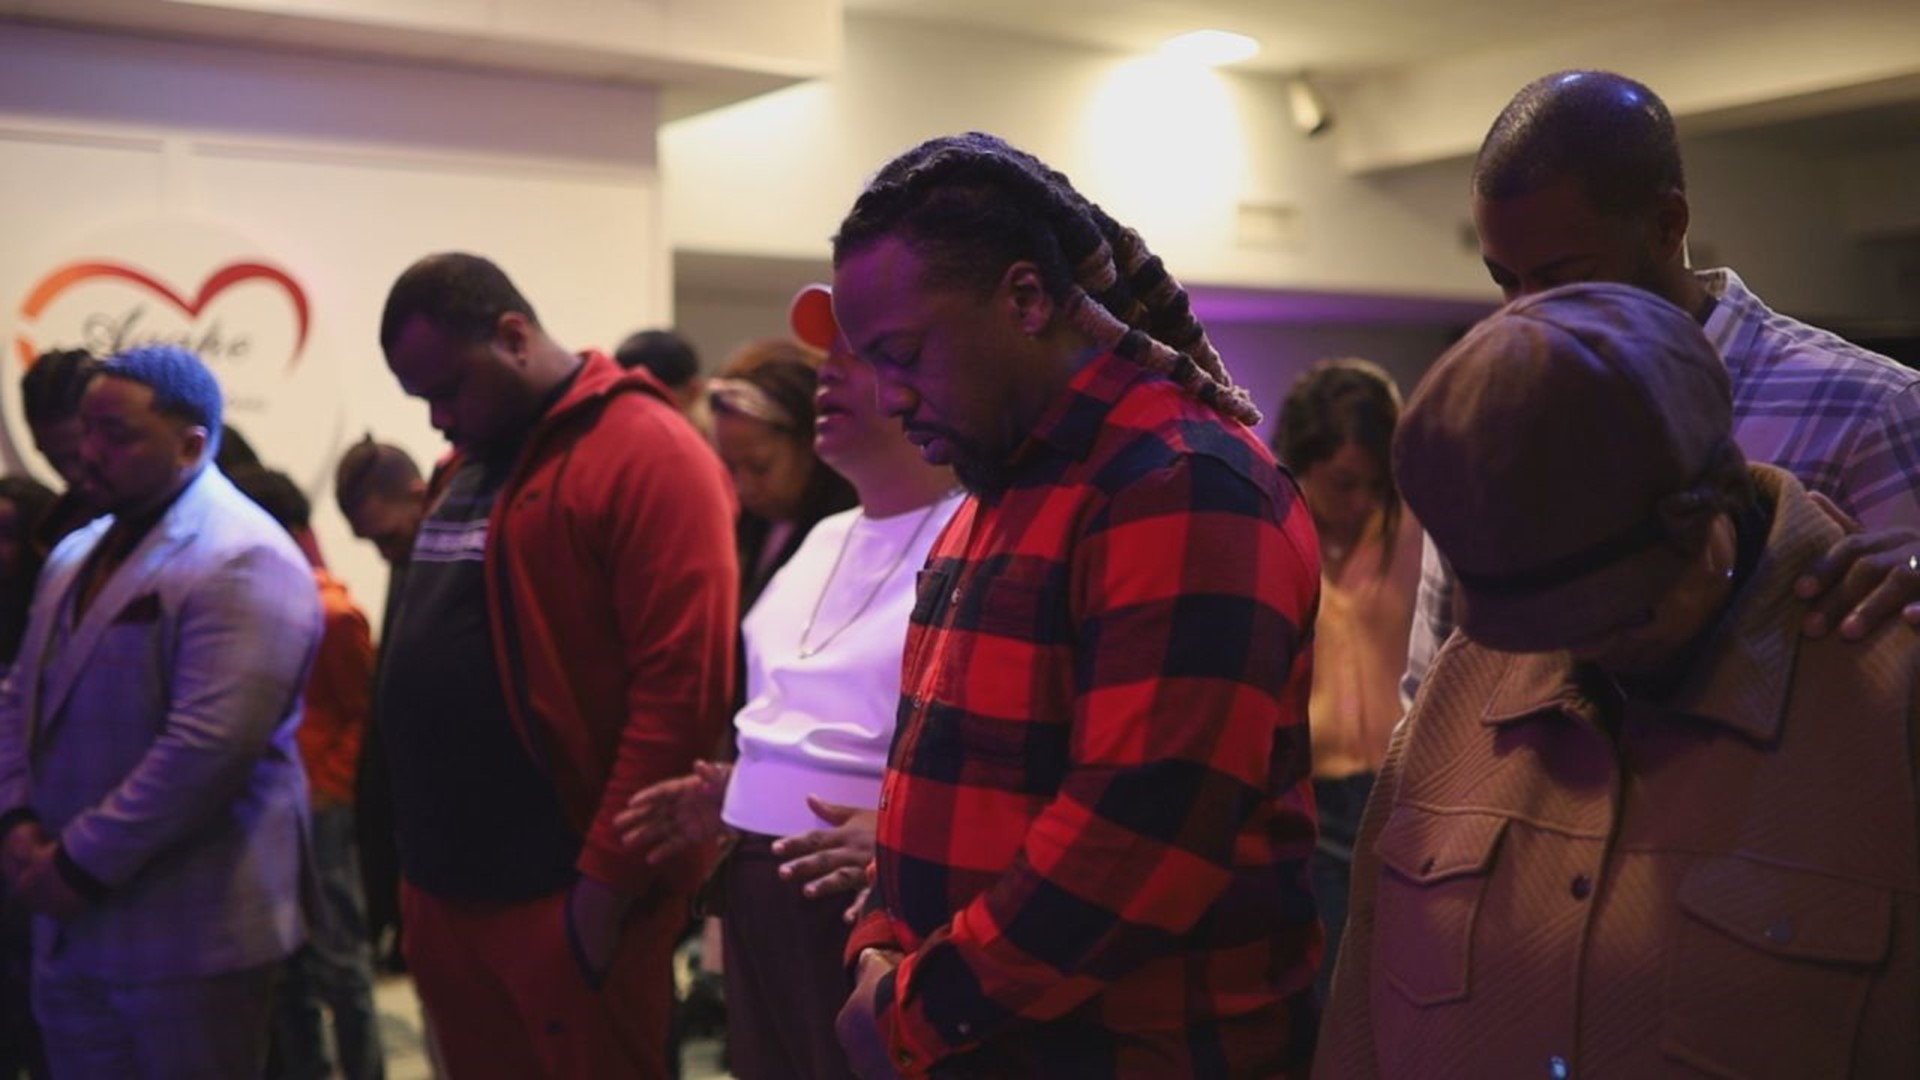 A Sunday morning sermon at Agape Ministries in Harrisburg is a start for men seeking a second chance after prison.